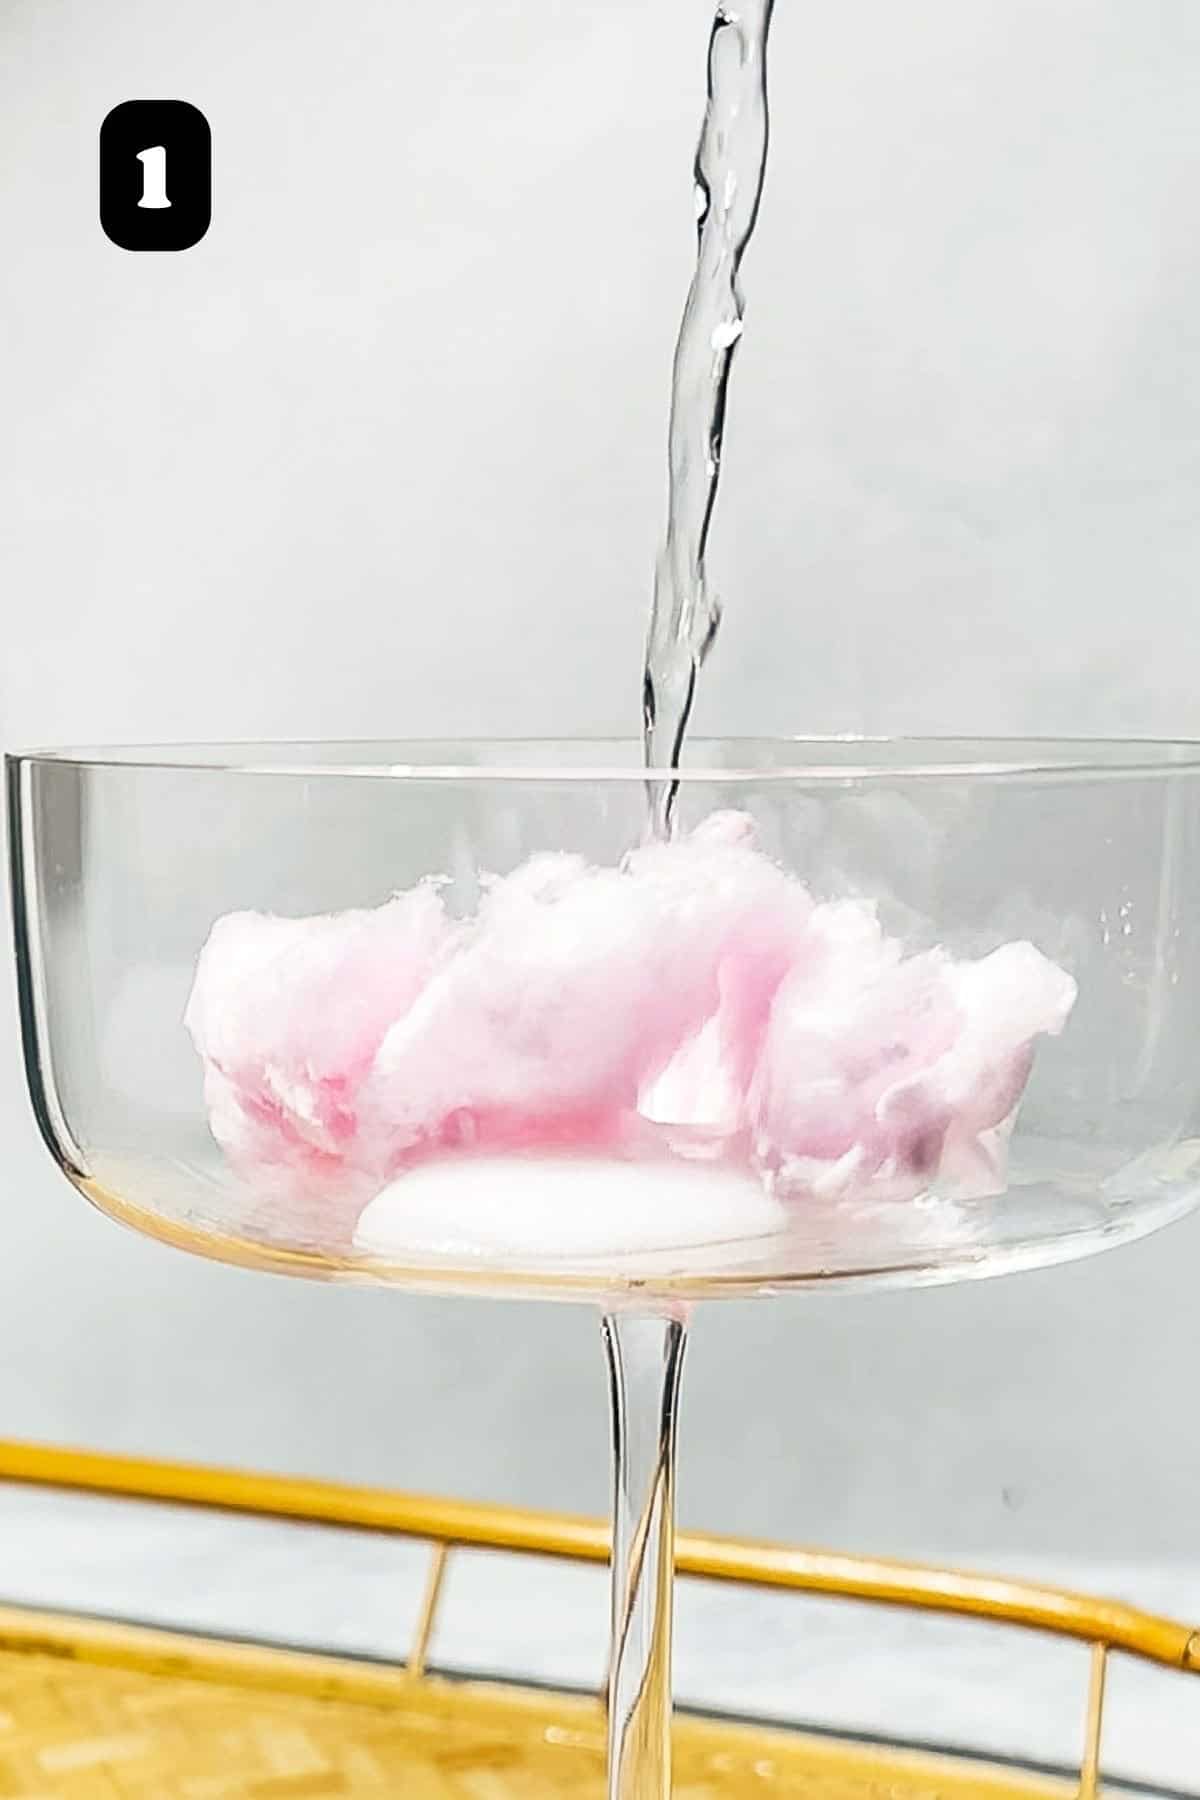 Step 1 showing prosecco being poured on top of the cotton candy in a coupe glass.